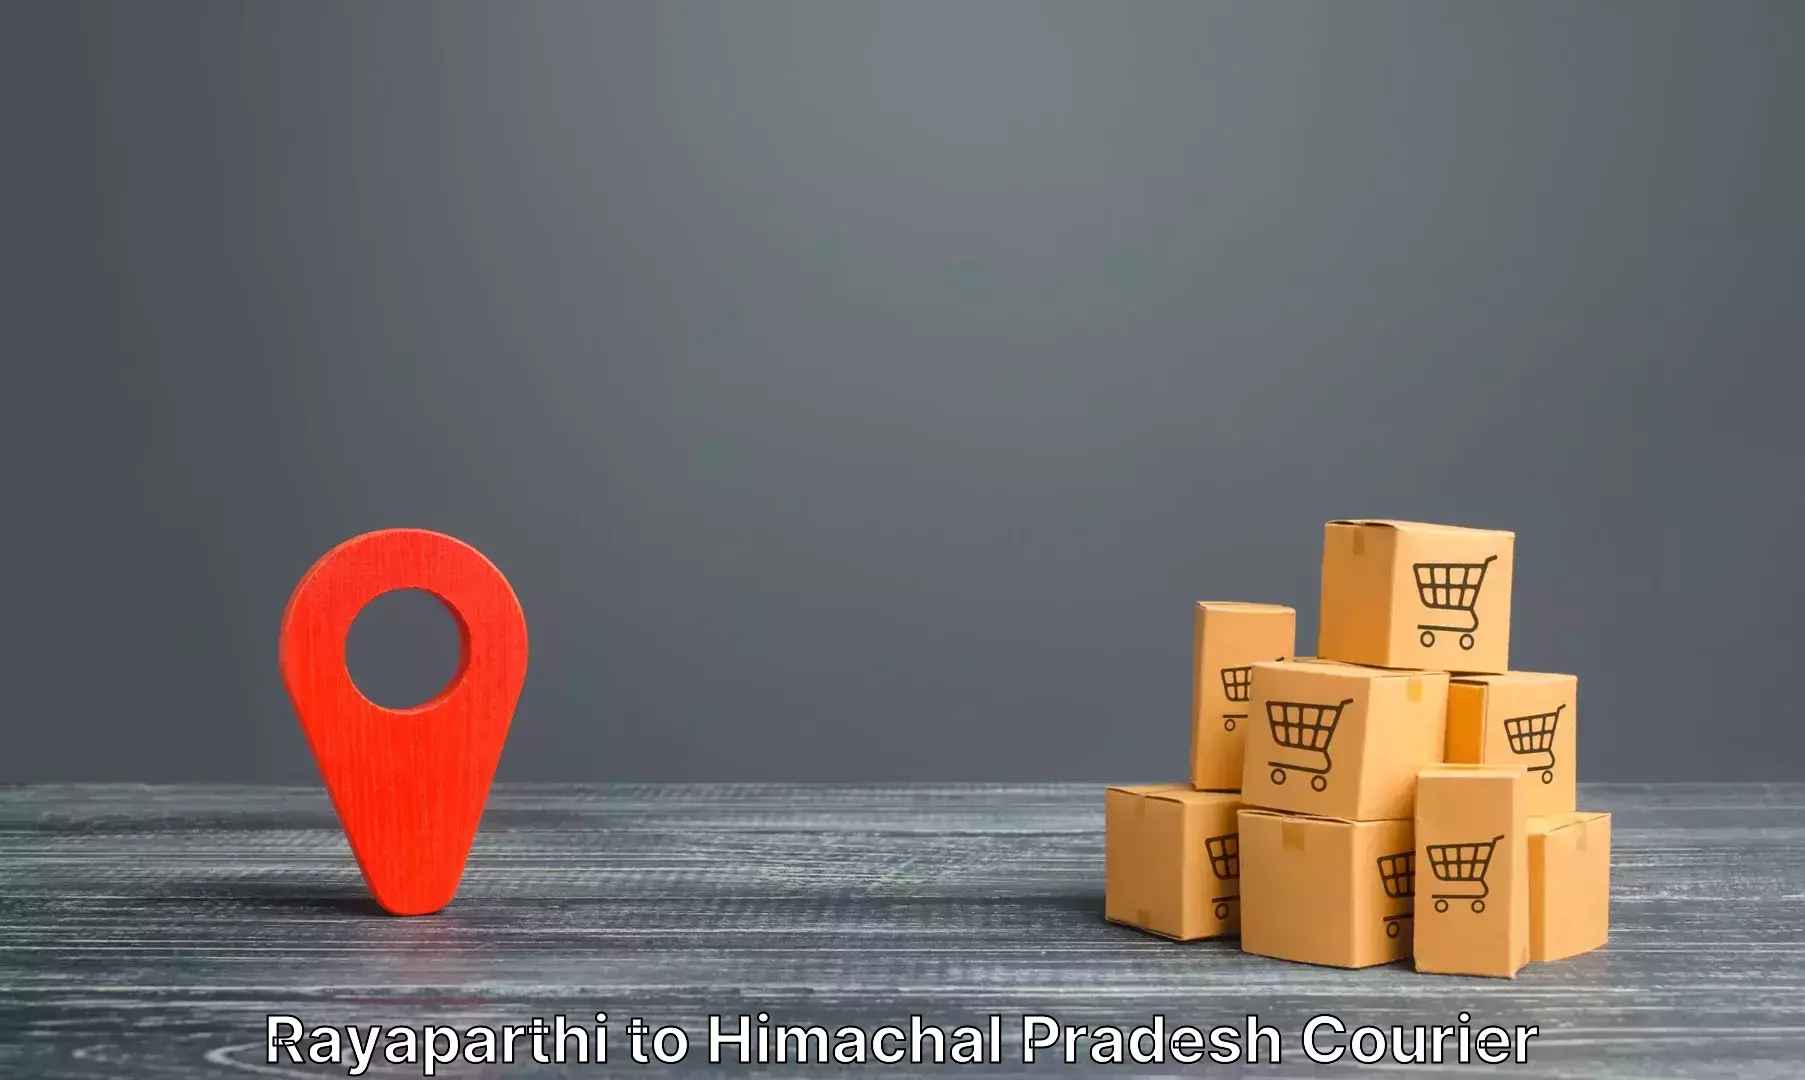 Baggage shipping service Rayaparthi to YS Parmar University of Horticulture and Forestry Solan